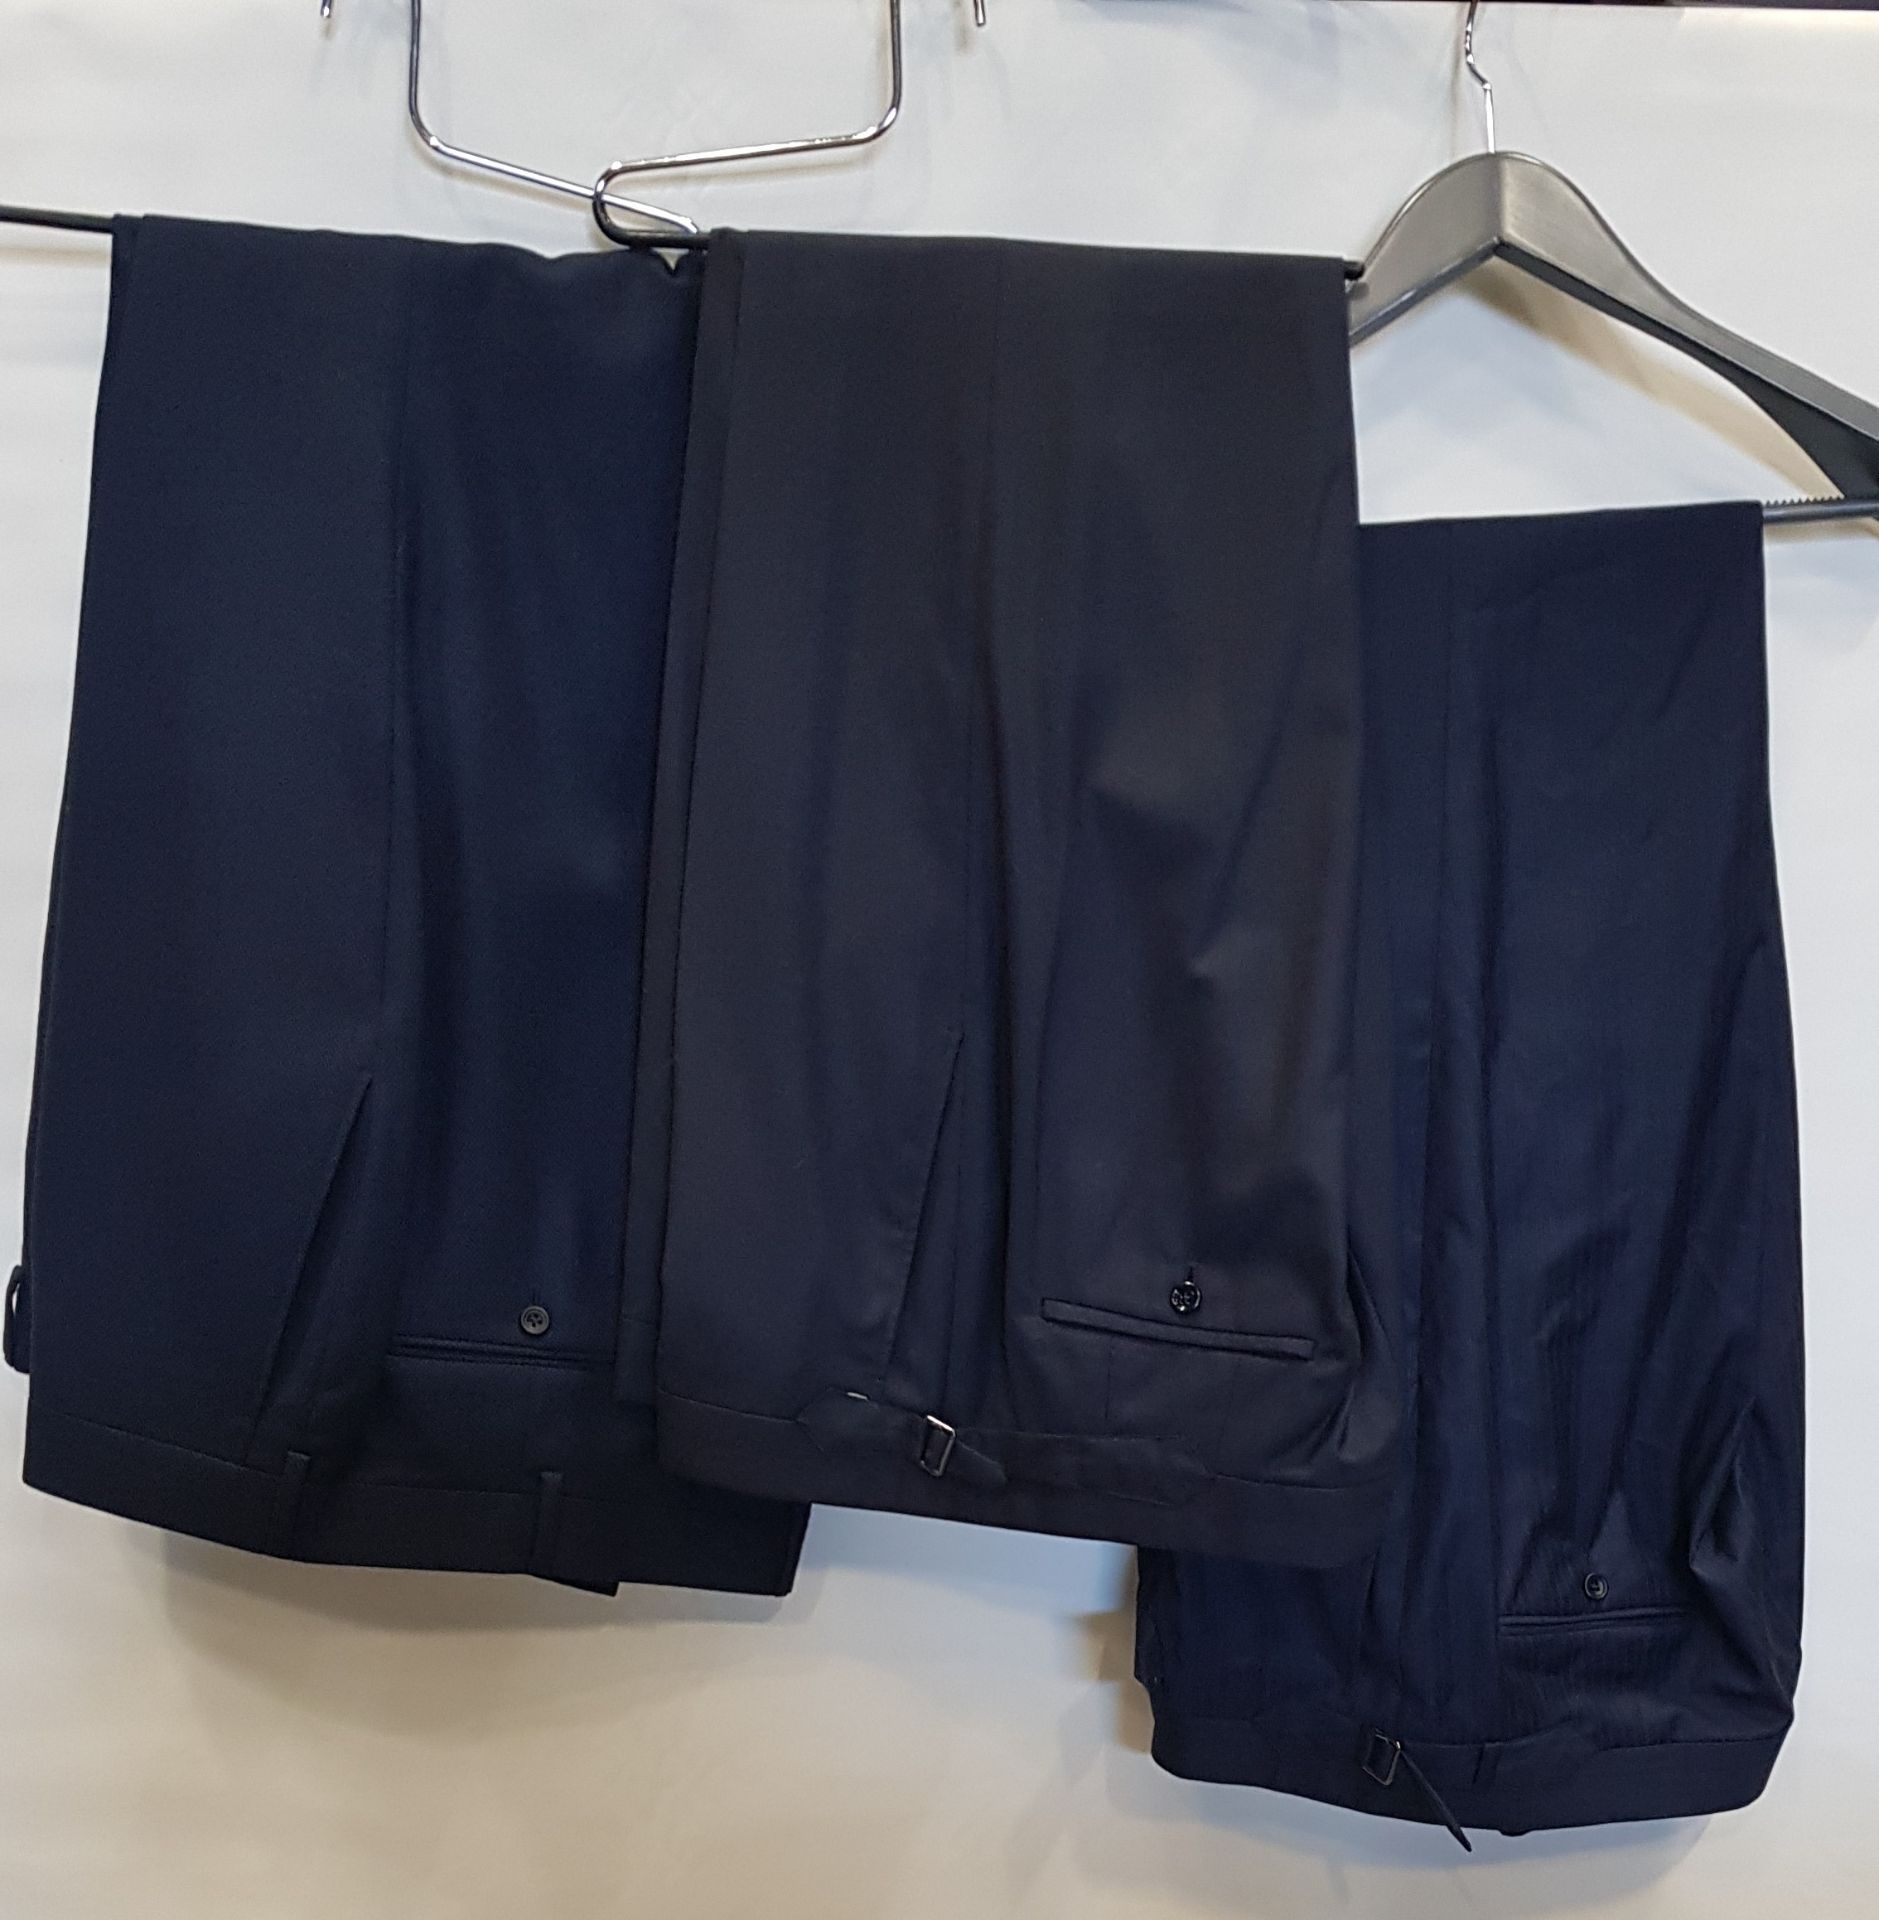 12 X PAIRS OF BRAND NEW LUTWYCHE BLACK OR BLUE TROUSERS IN ASSORTED STYLES & SIZES (NOTE NOT FULLY